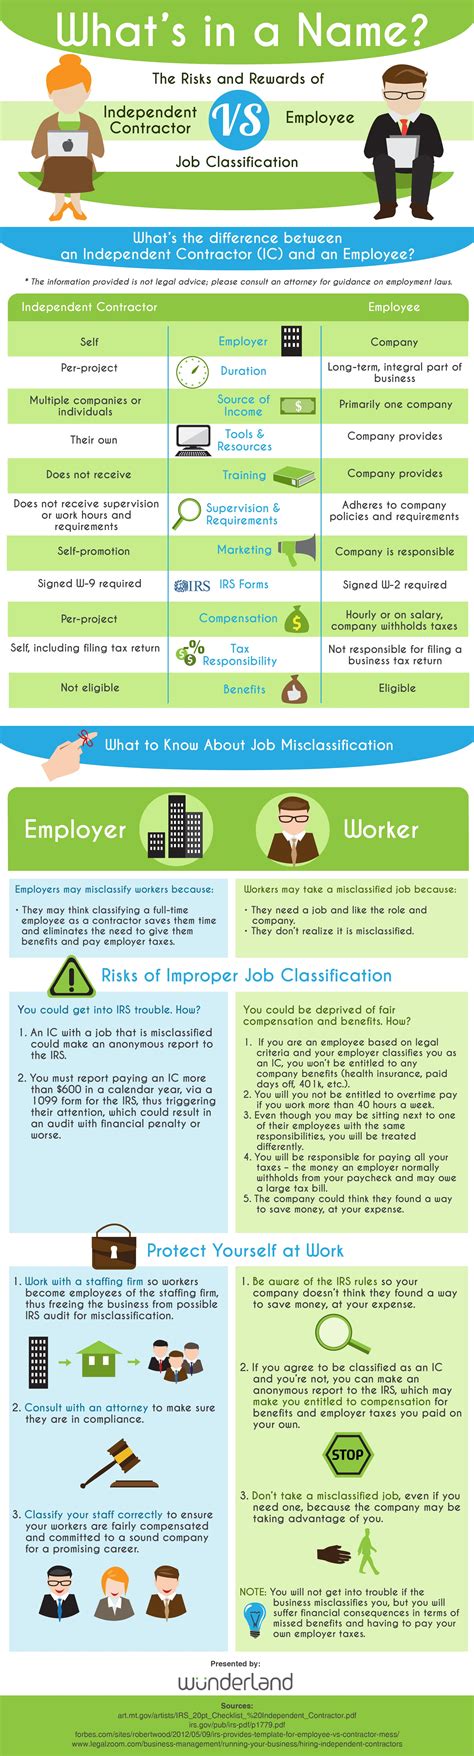 Why Employee Vs Independent Contractor Classification Matters